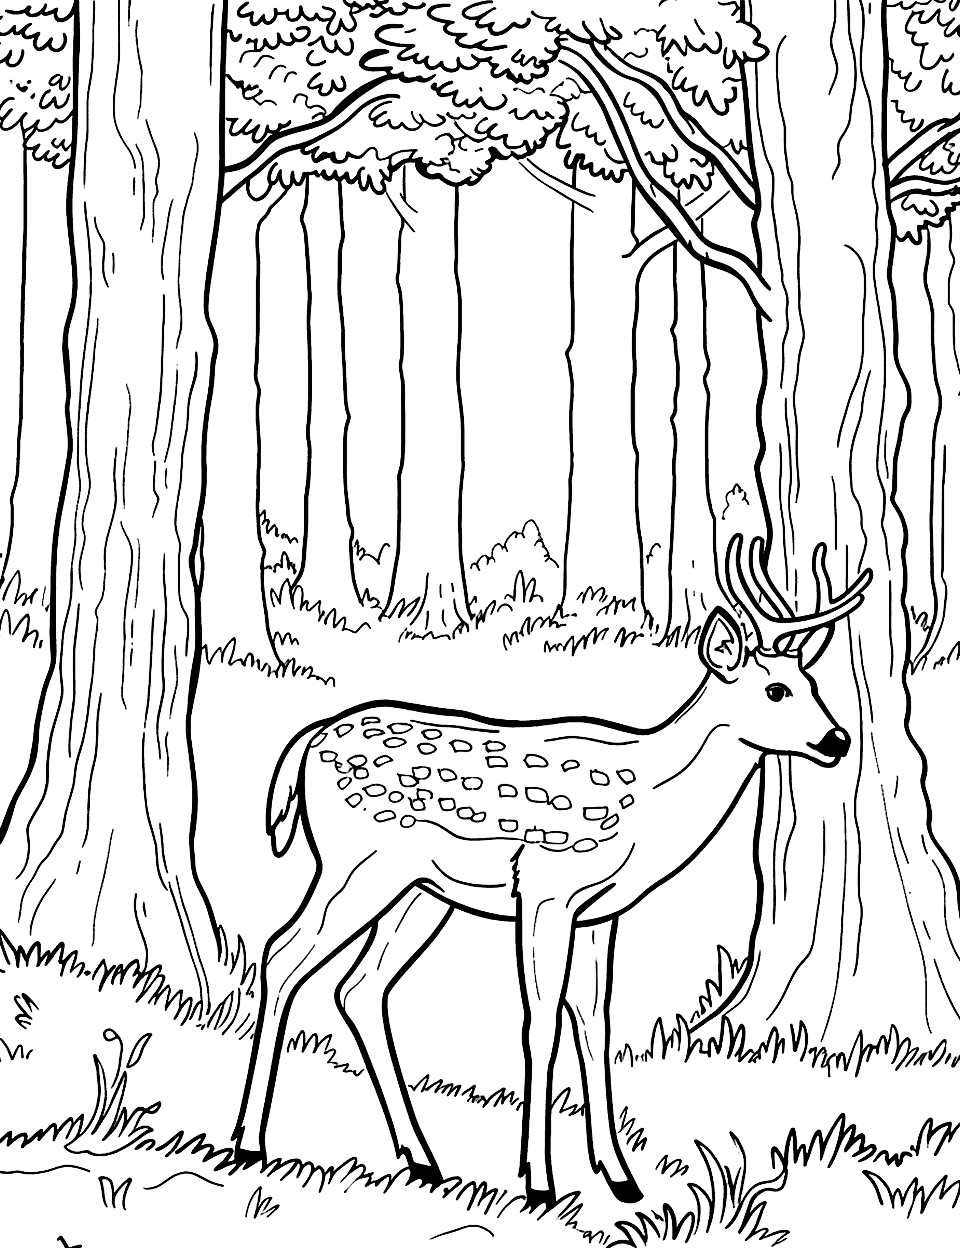 Fantasy Deer in a Forest Coloring Page - A deer exploring a mystical forest filled with trees.